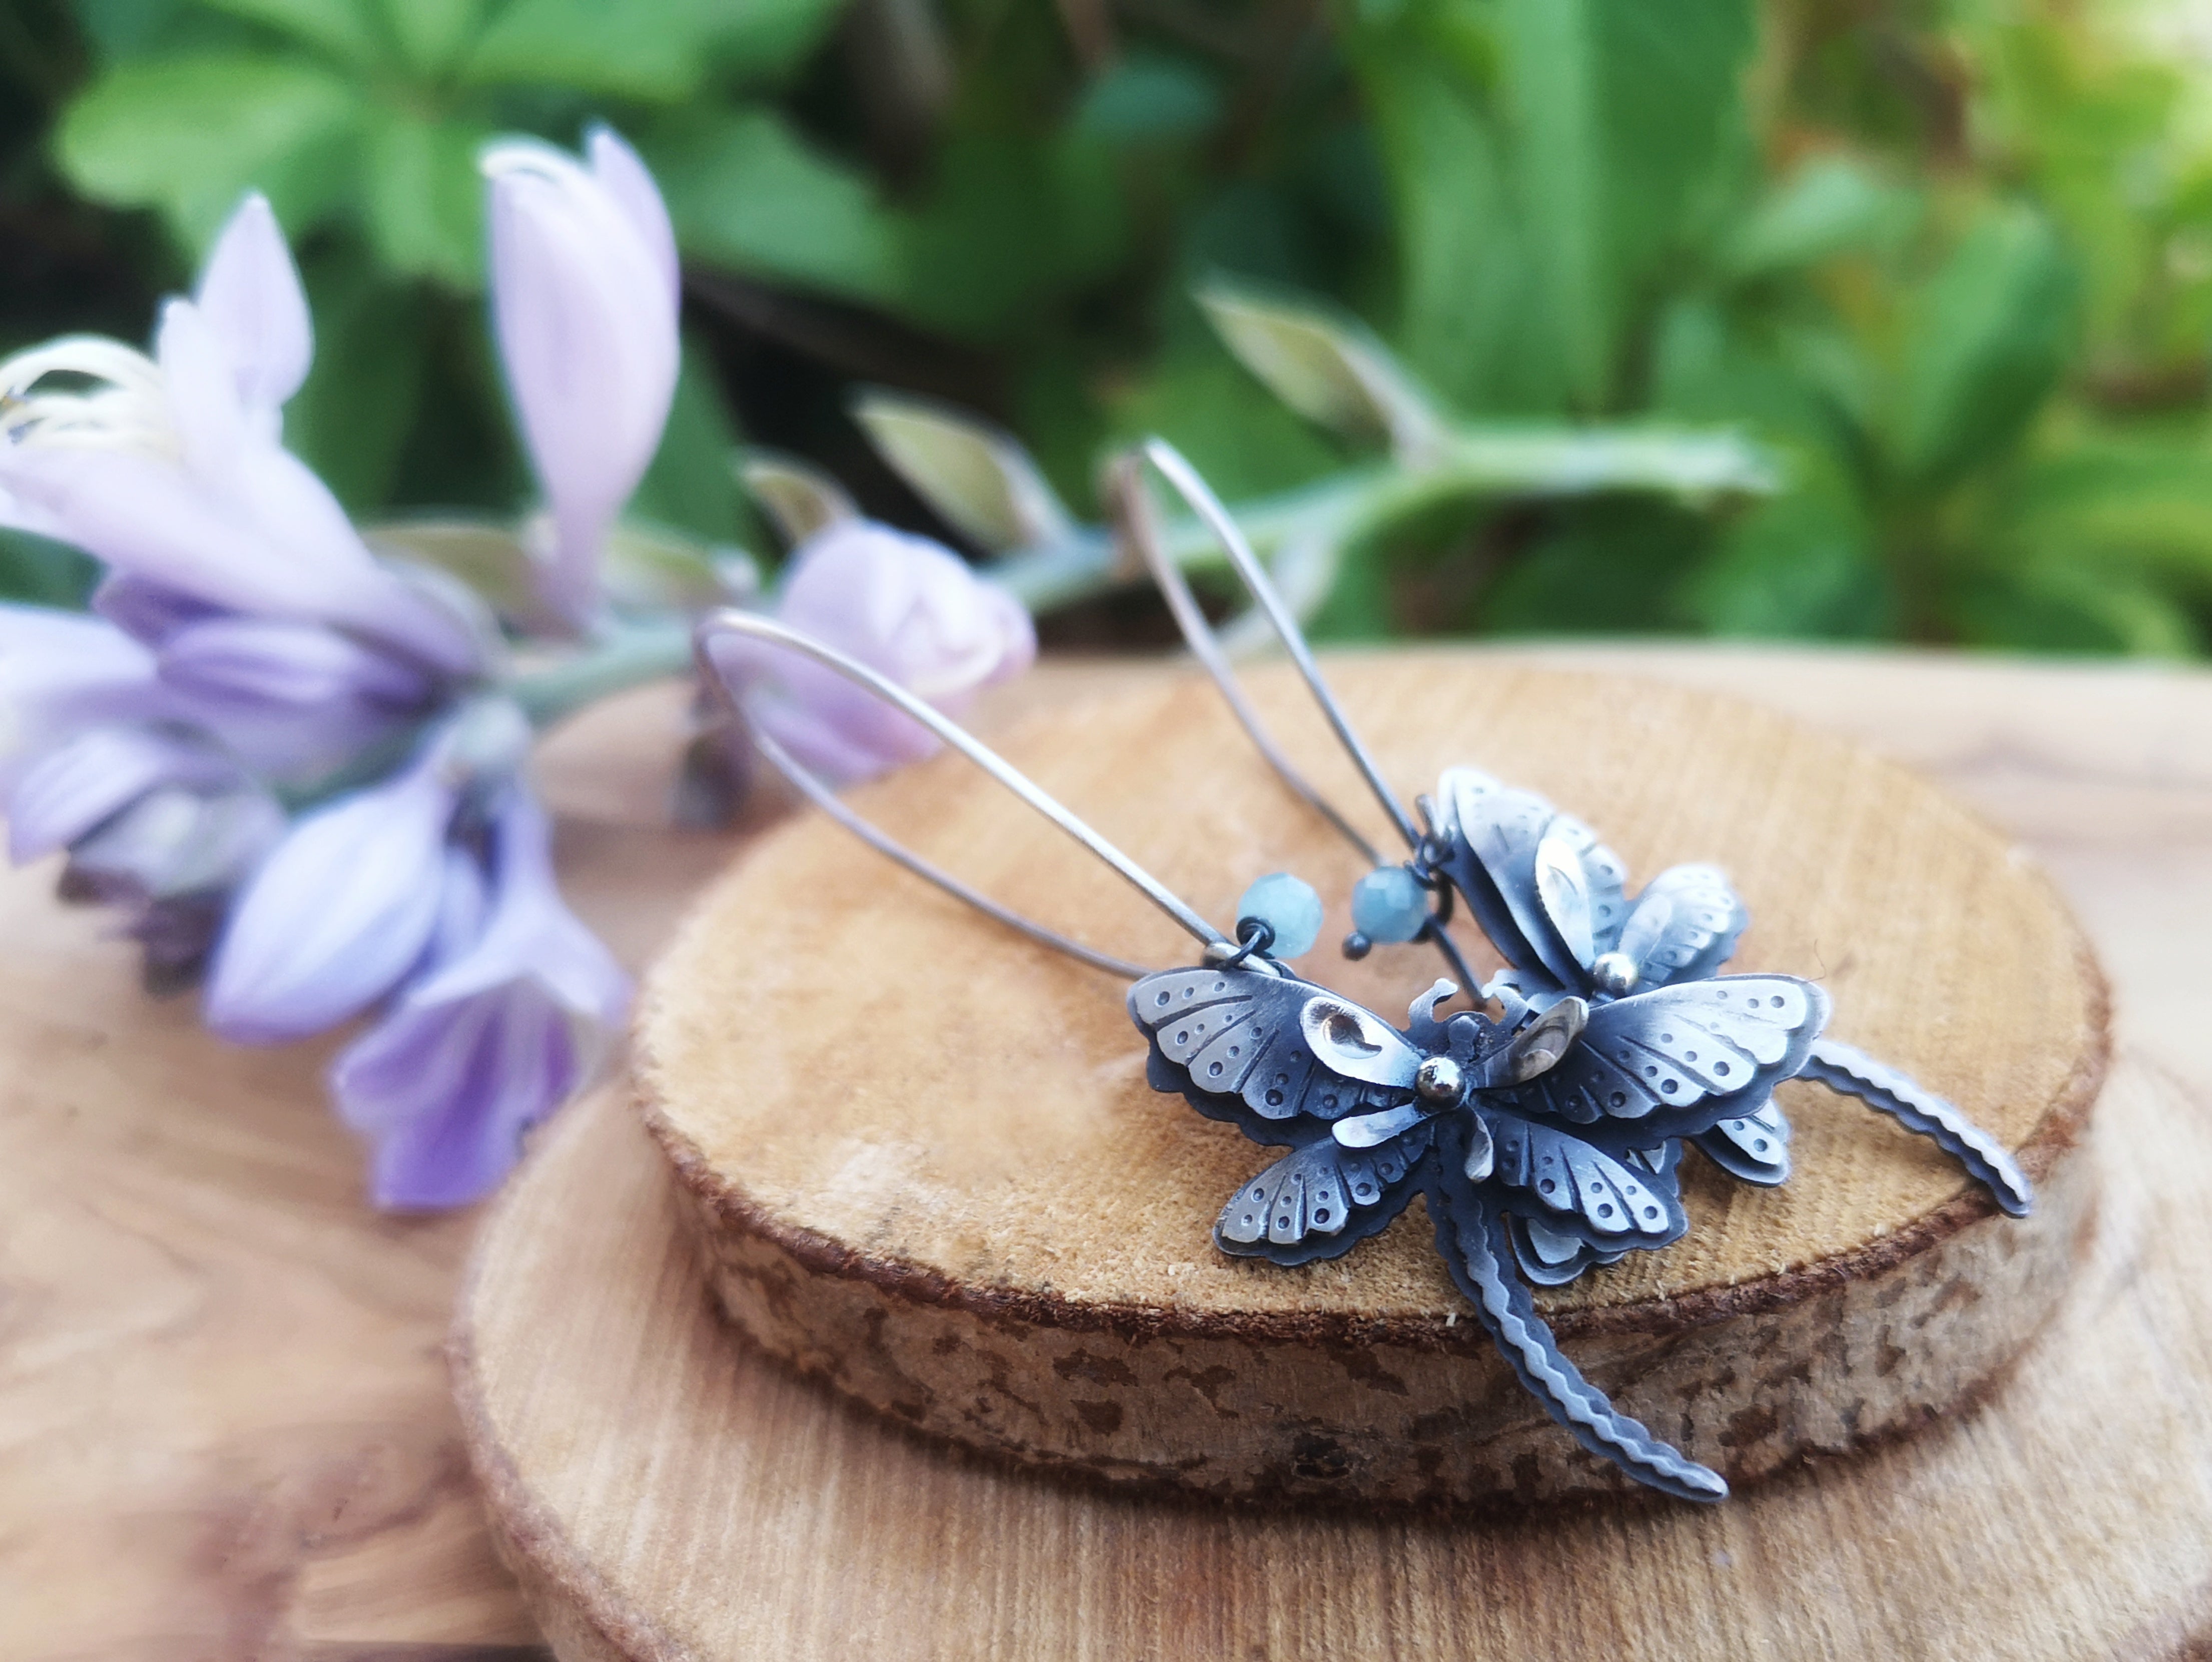 The Dragonfly Earrings